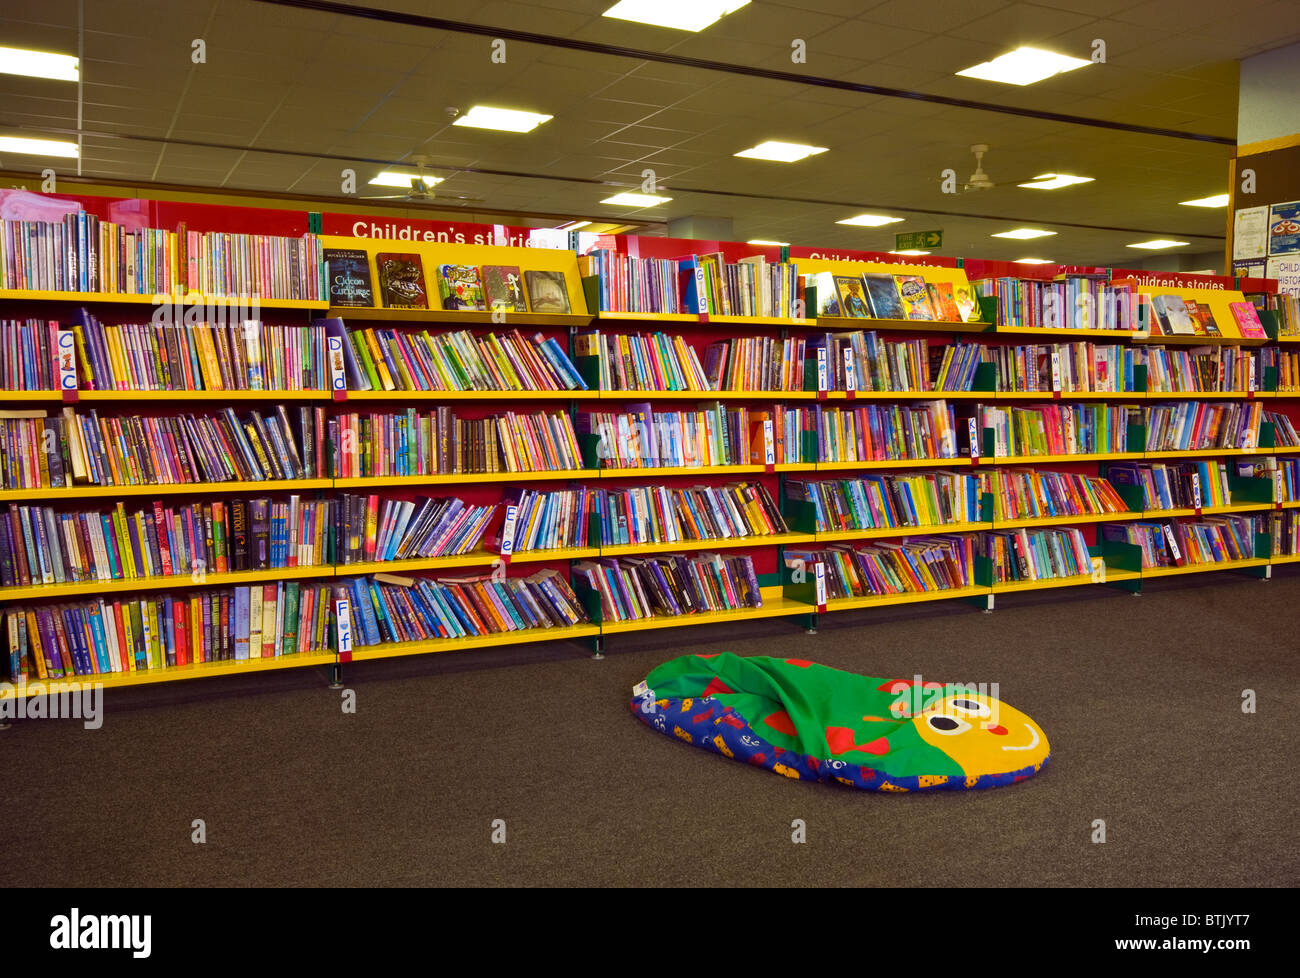 Childrens Section In A Public Library Stock Photo